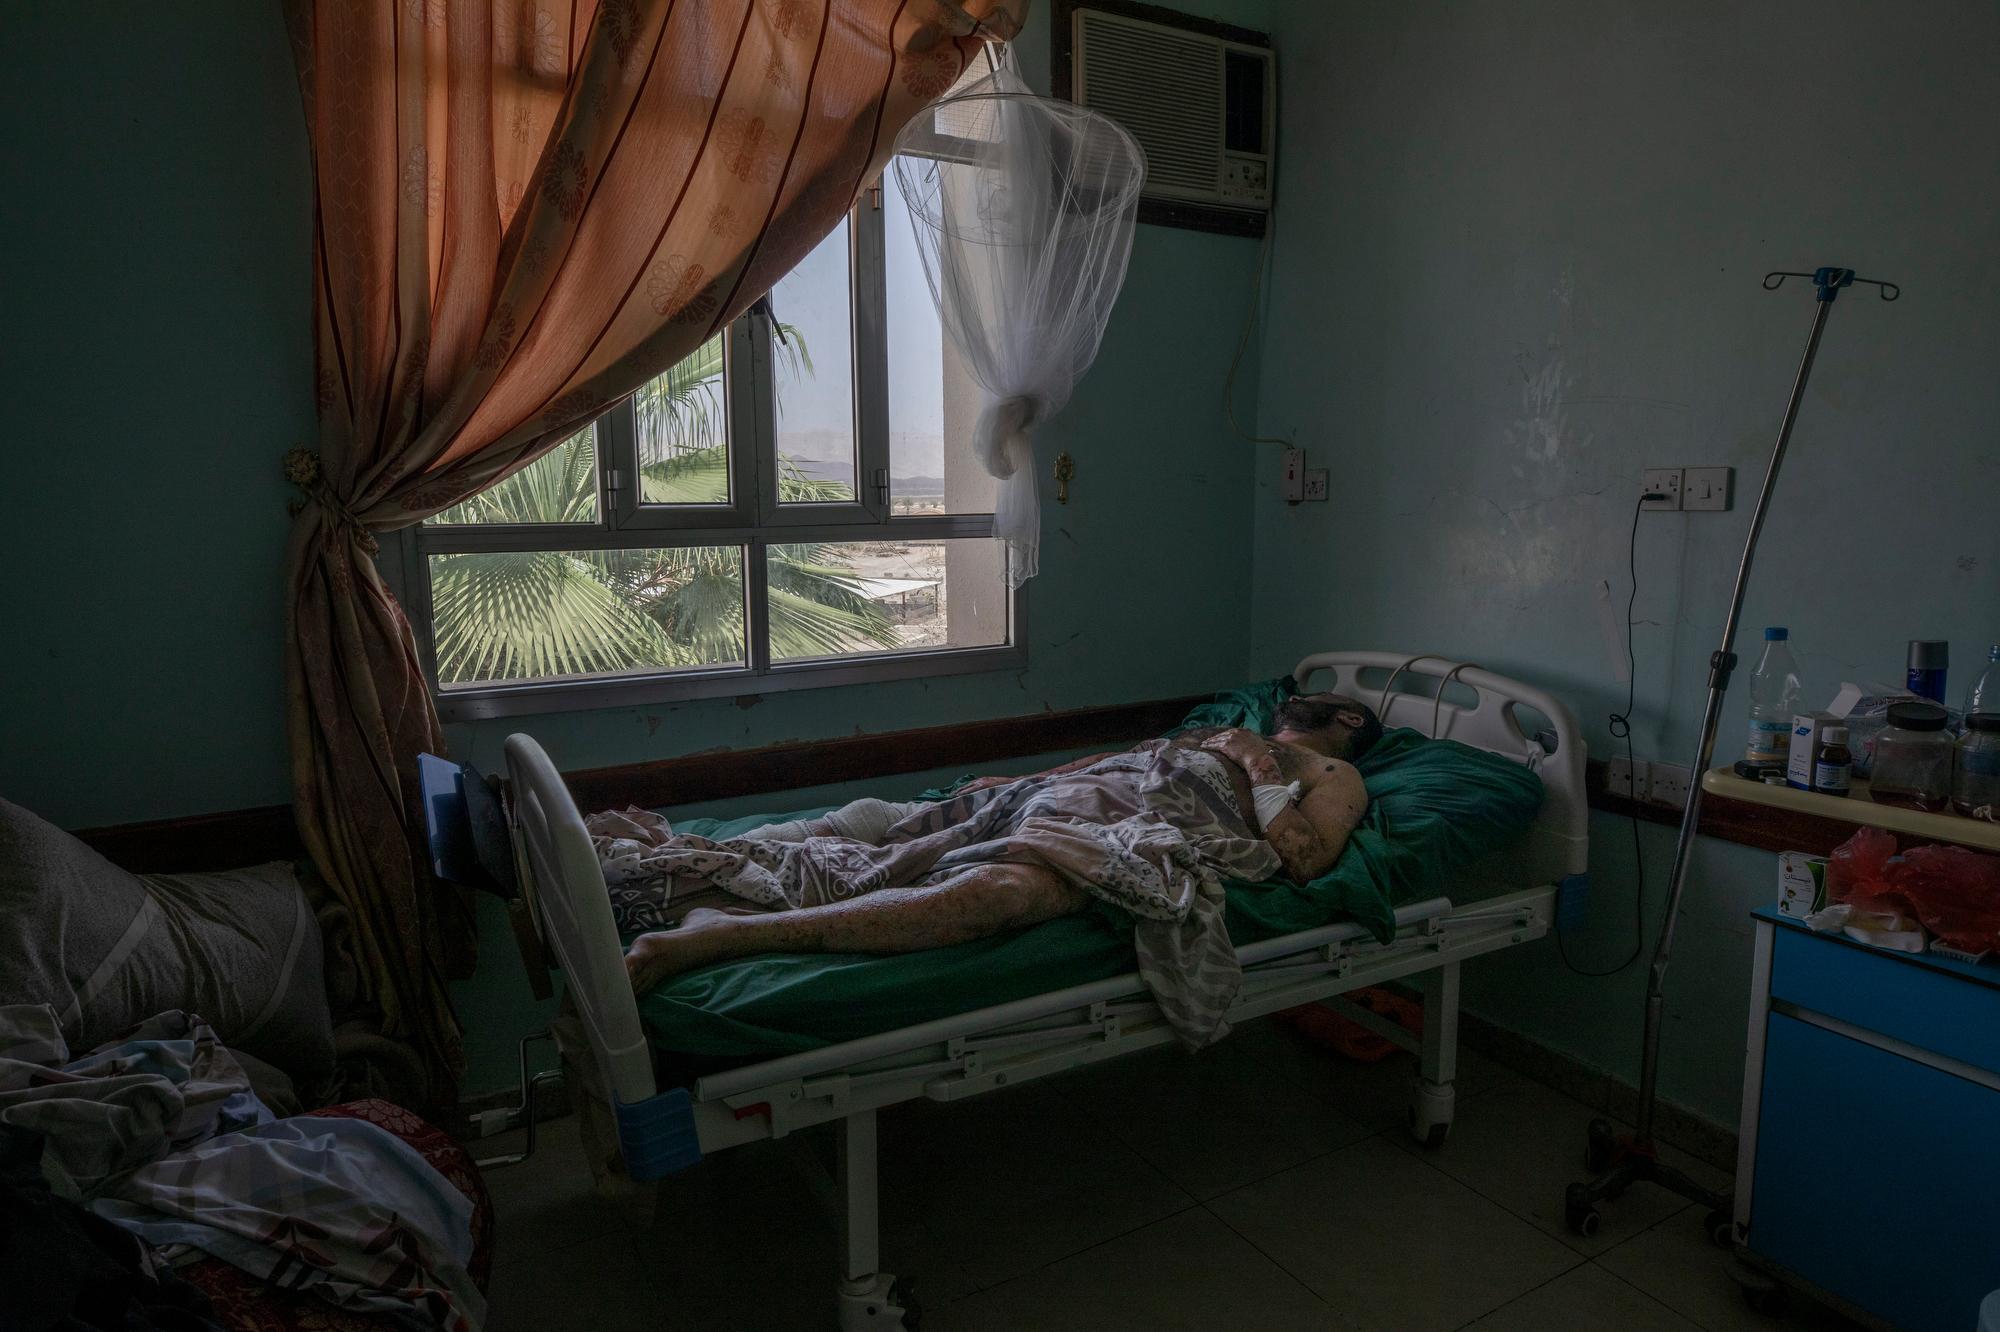 A Yemeni man who was severely injured when a ballistic missile and an explosive-laden drone fired by Yemen's Houthi rebels hit a fuel station in the Rawdha neighborhood of Marib, Yemen, receives treatment at a hospital in Marib, on June 21, 2021. (AP Photo/Nariman El-Mofty)